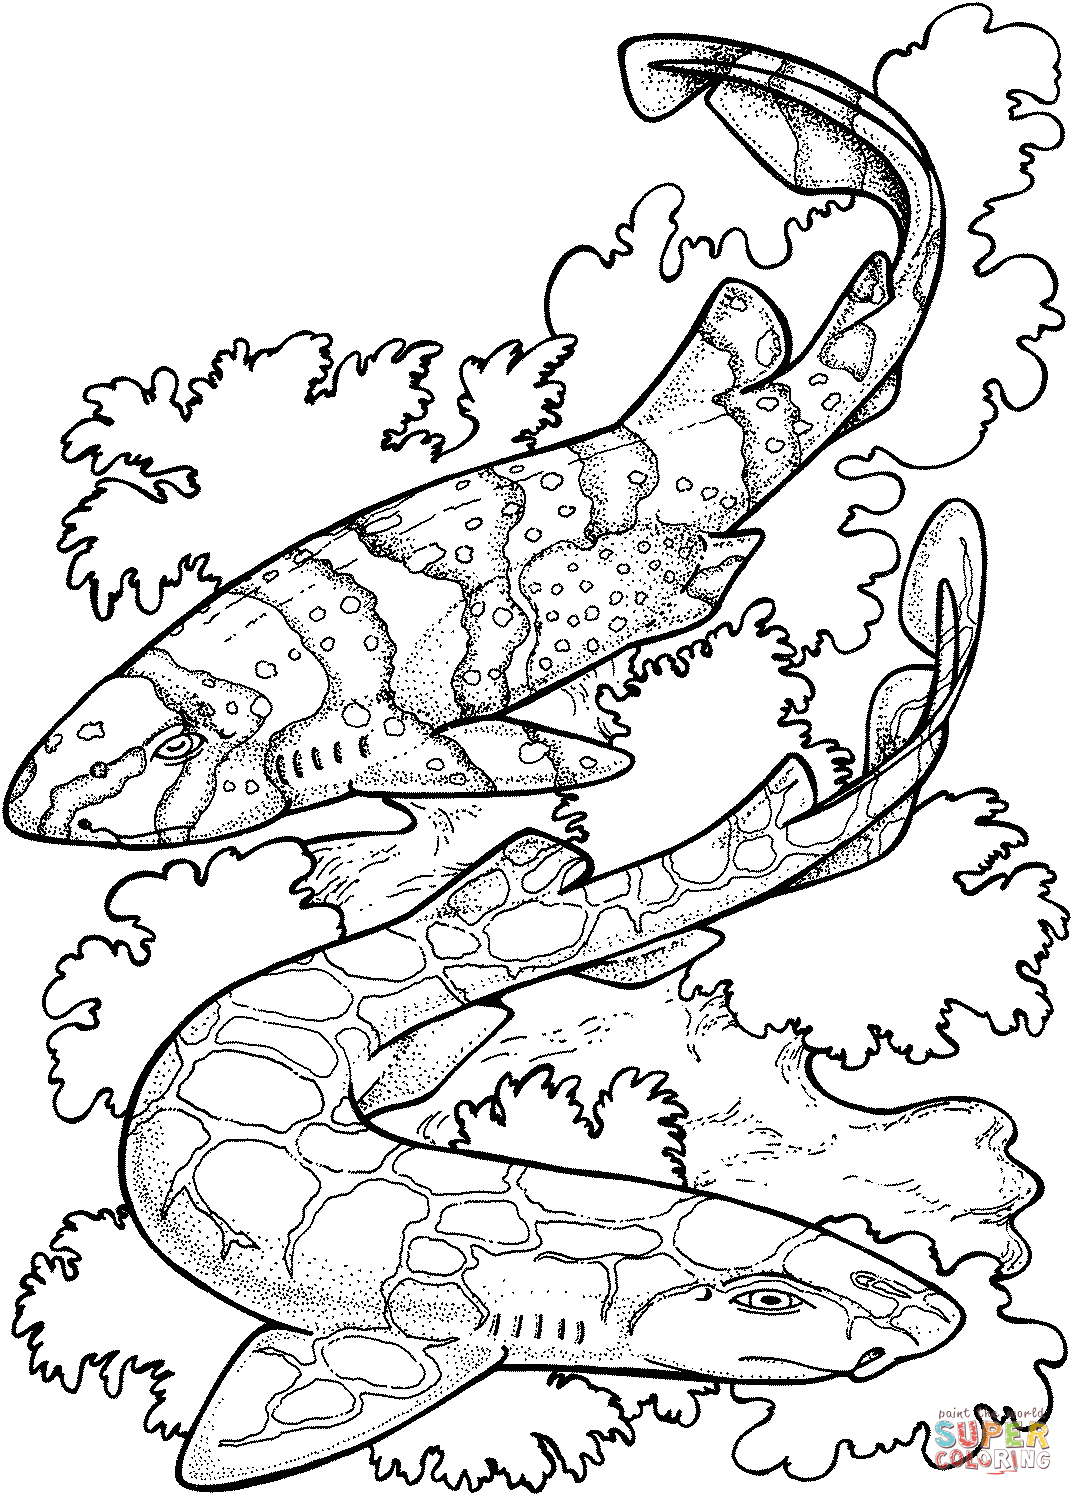 Zebra Shark Coloring Pages